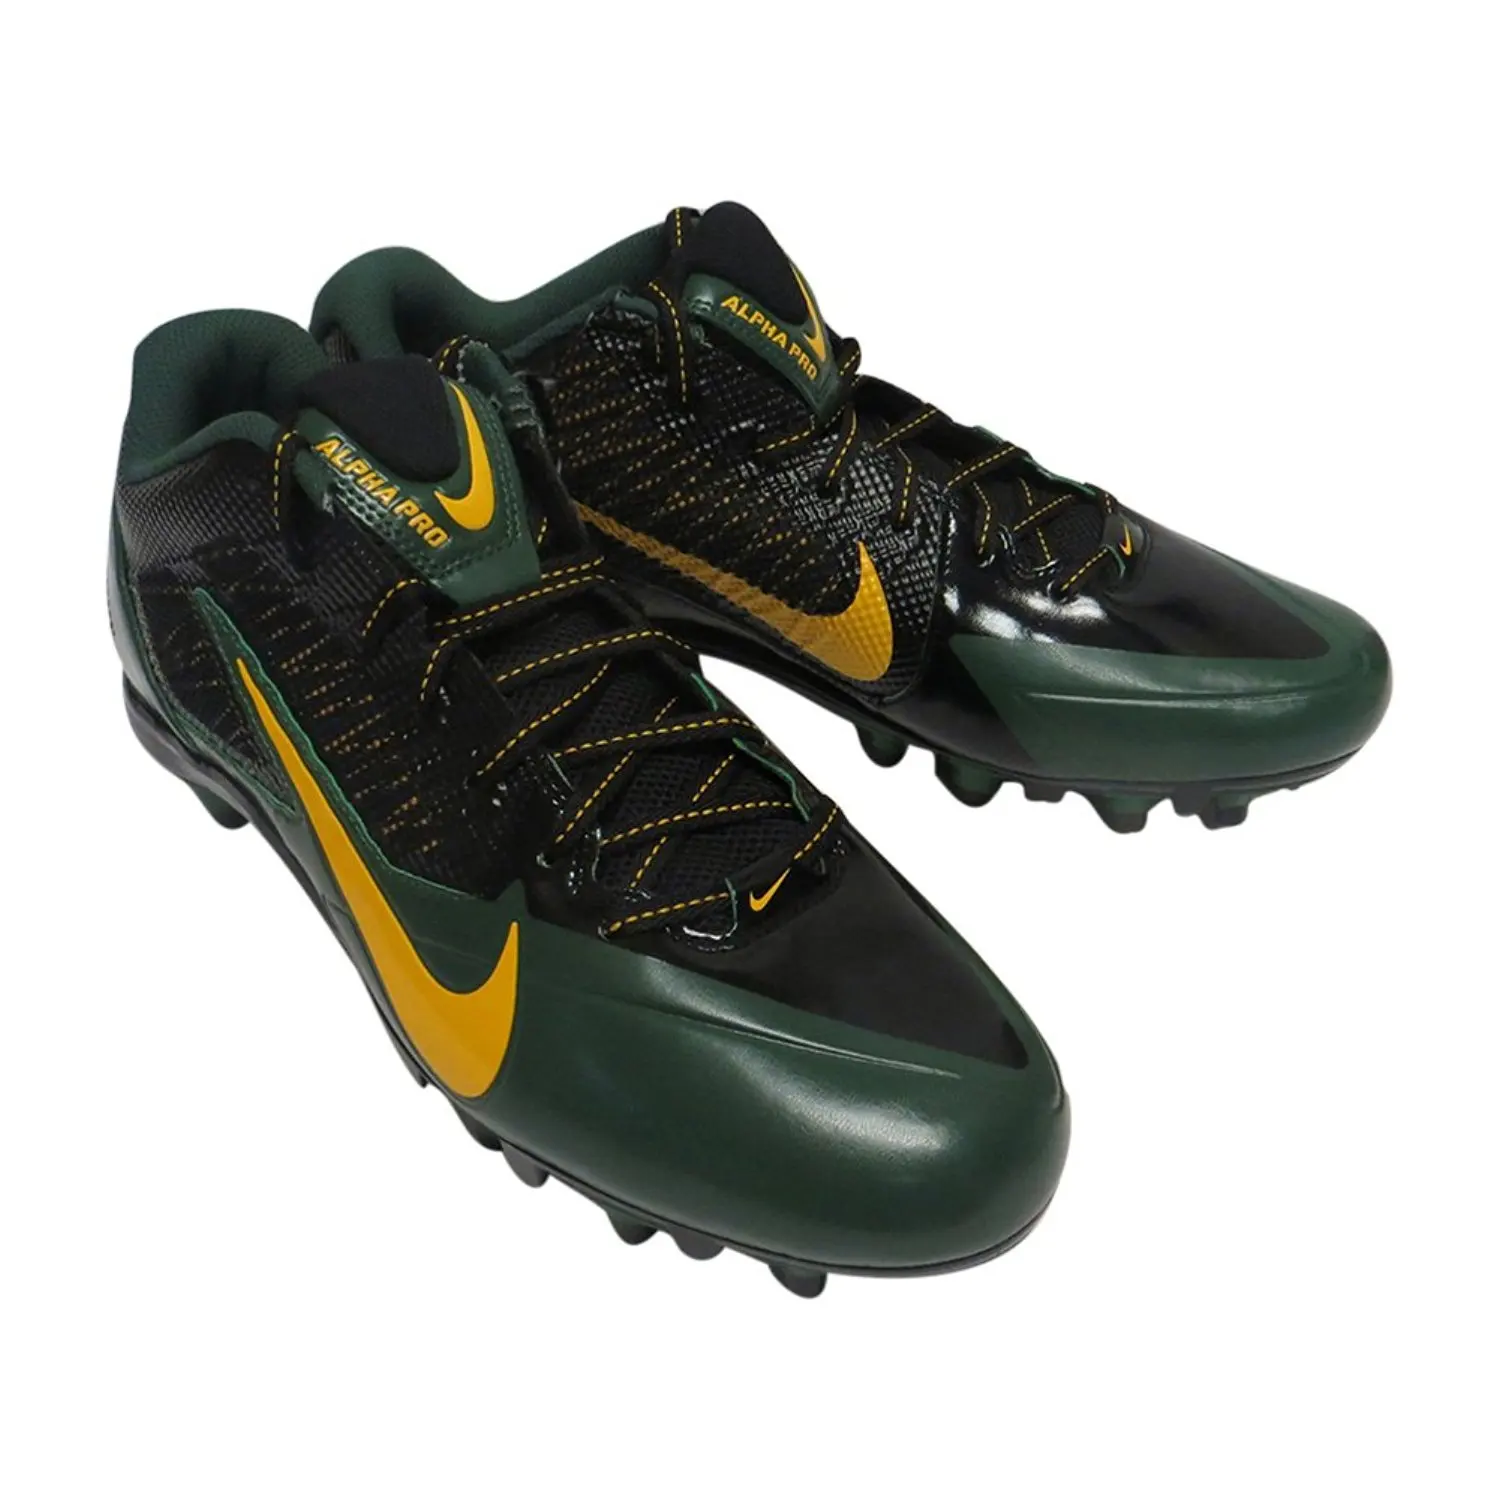 green and black football cleats